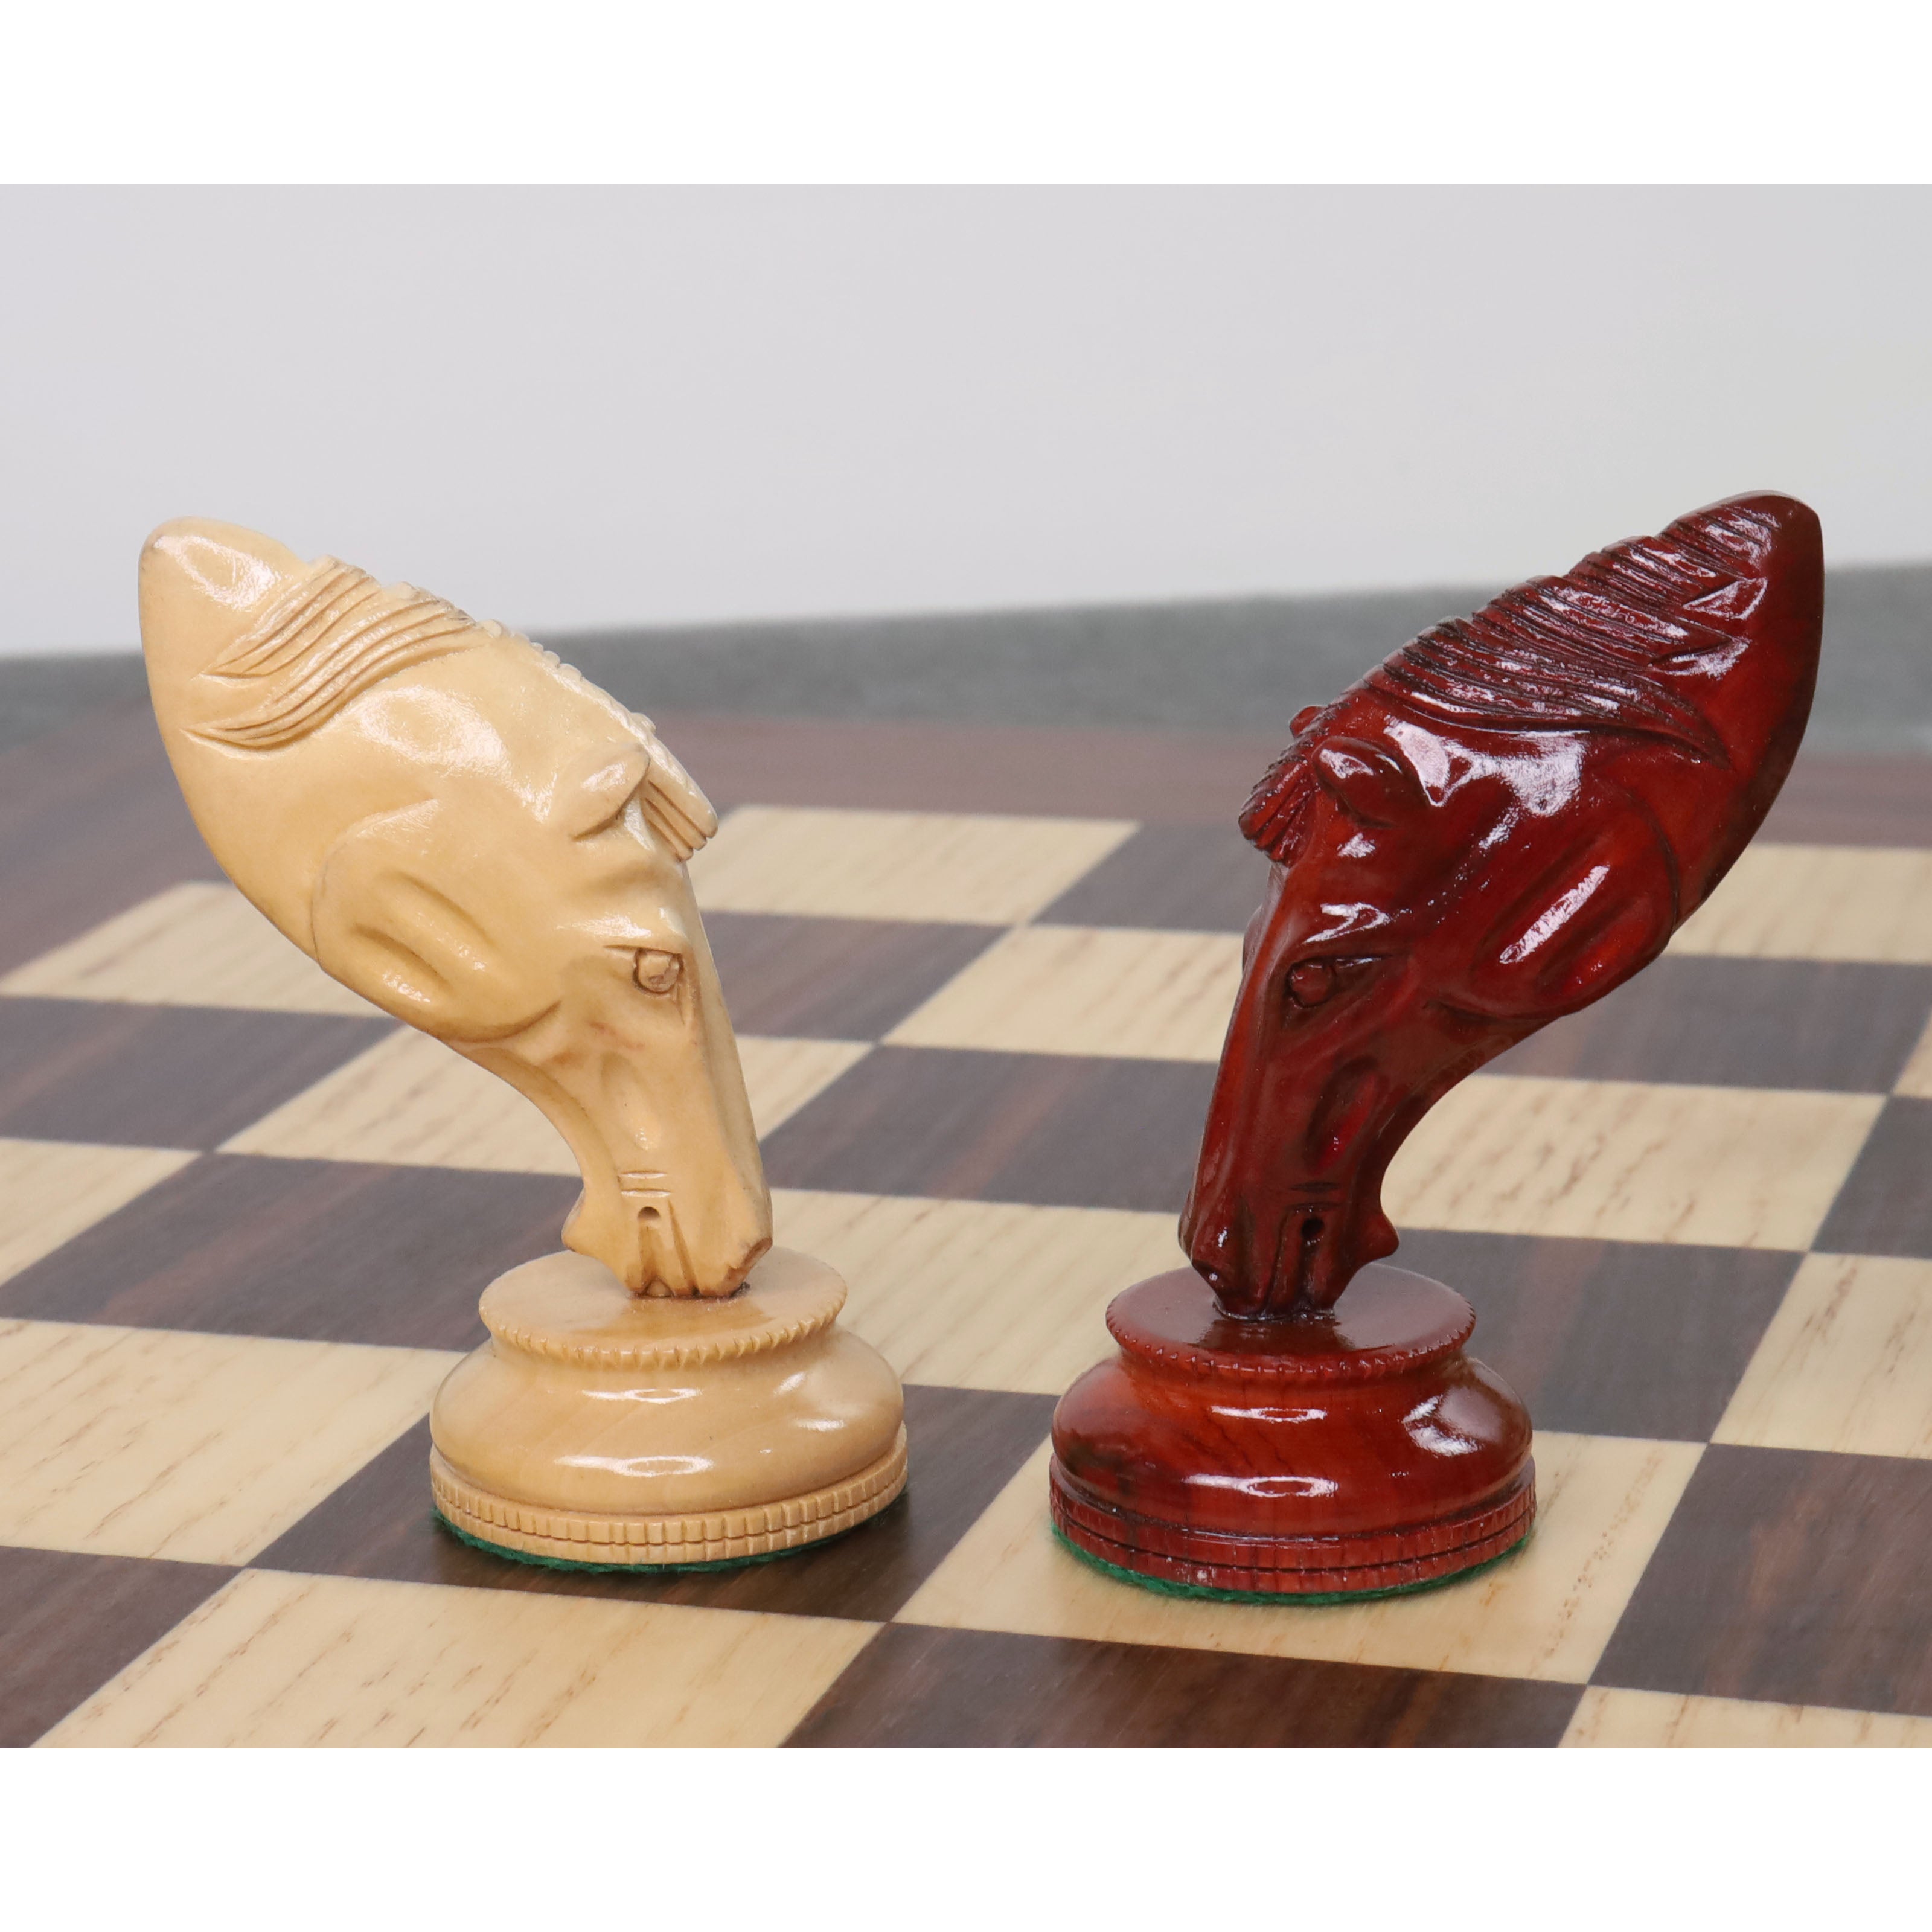 4.3" Grazing Knight Luxury Staunton Chess Set- Chess Pieces Only-Lacquered Bud Rosewood